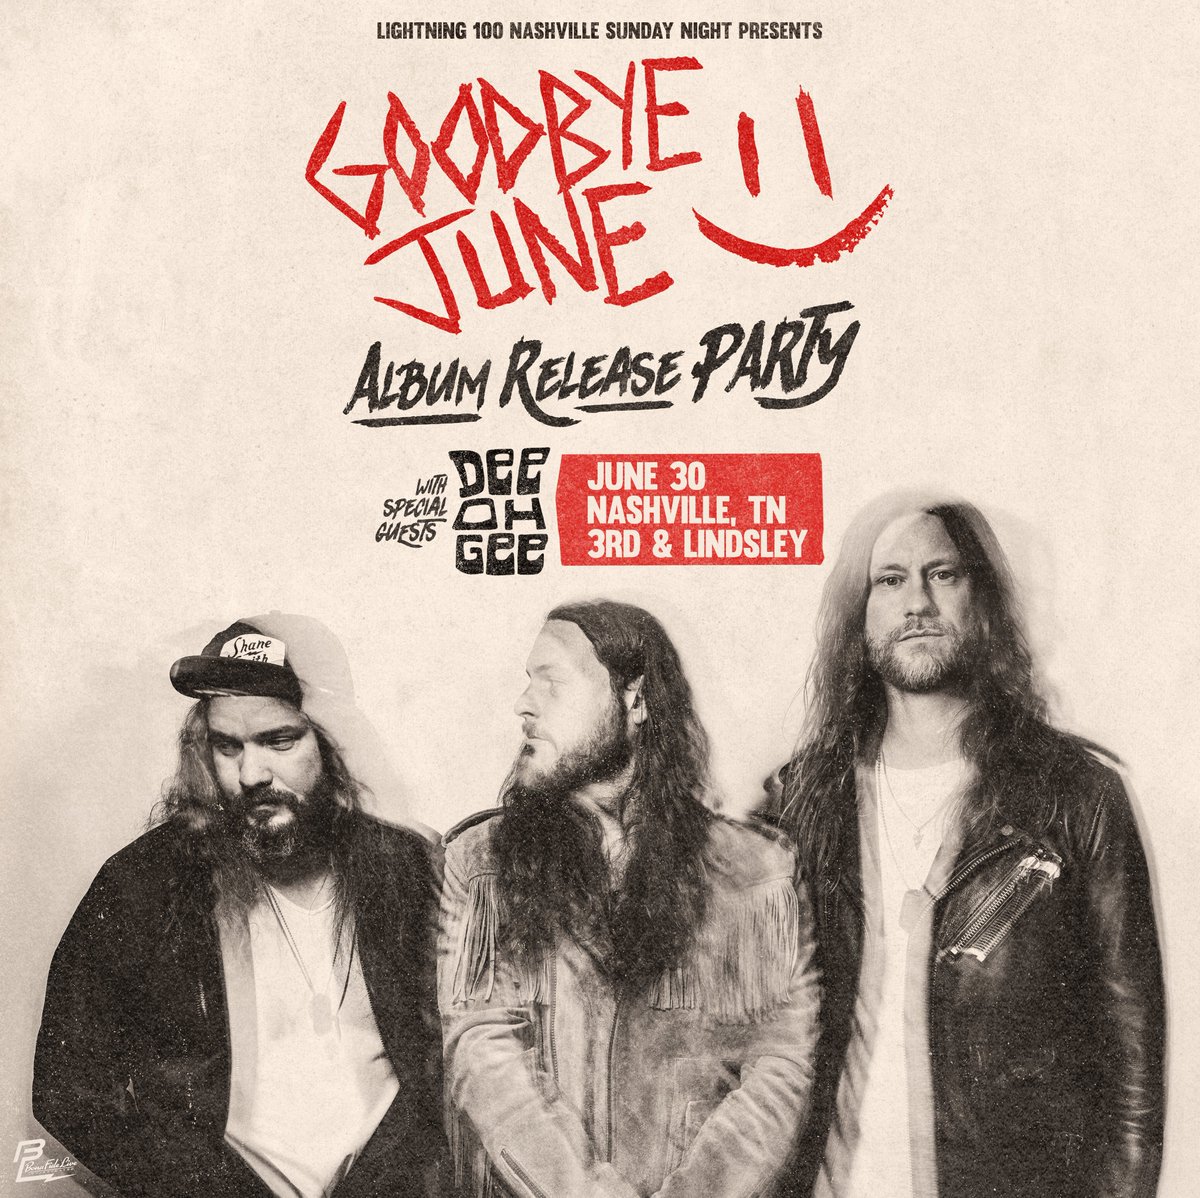 📣 JUST ANNOUNCED & ON SALE NOW 📣
@Lightning100 #NashvilleSundayNight Presents @GoodbyeJune 4 their Album Release Party w/ special guests @Dee_Oh_Gee_ on June 30!
tickets bit.ly/3yyQ76f
Presented by Bona Fide Live, Inc
Sponsored by Jack Daniel's & High Rise Beverage Co.